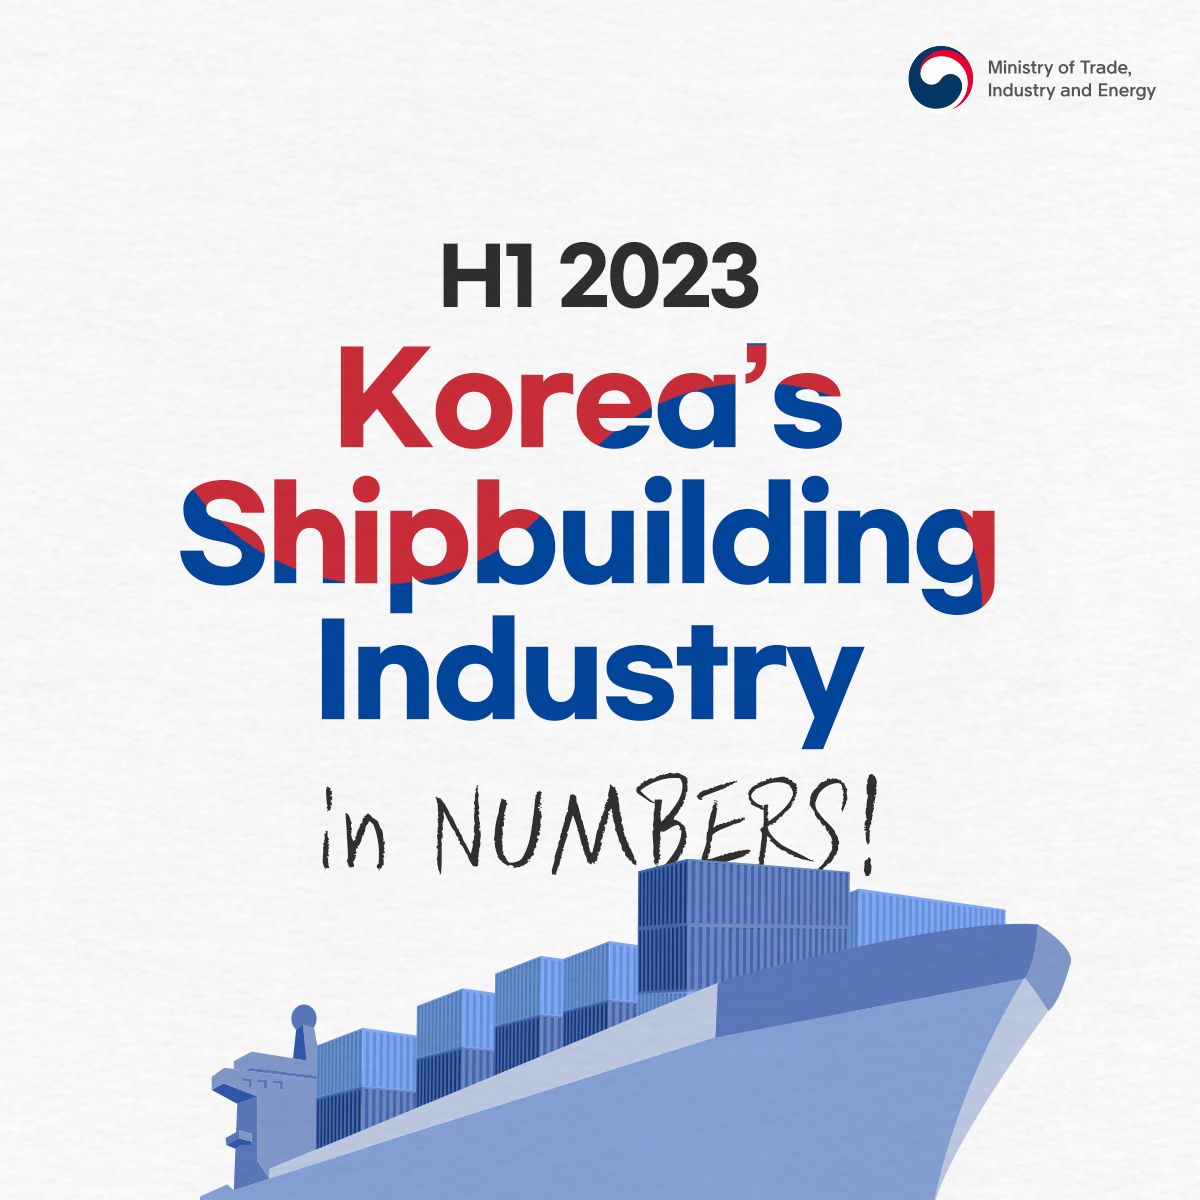 Korea's Shipbuilding Industry for H1 2023...in Numbers! Image 0